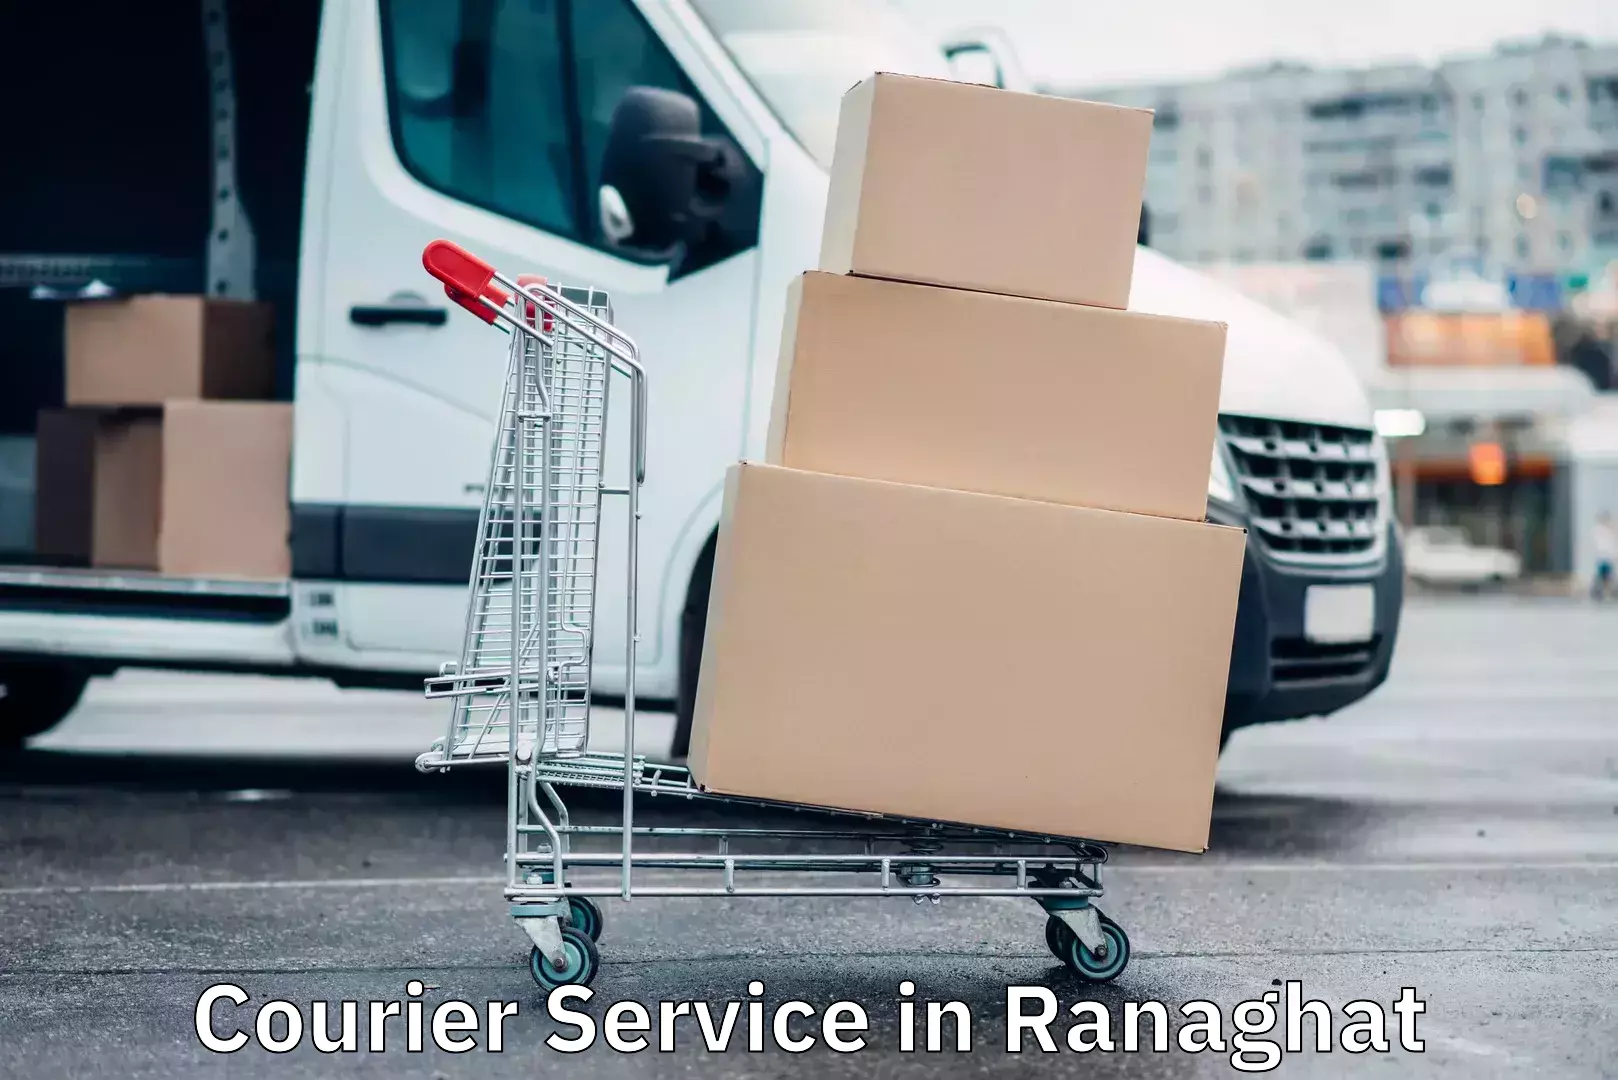 Professional parcel services in Ranaghat